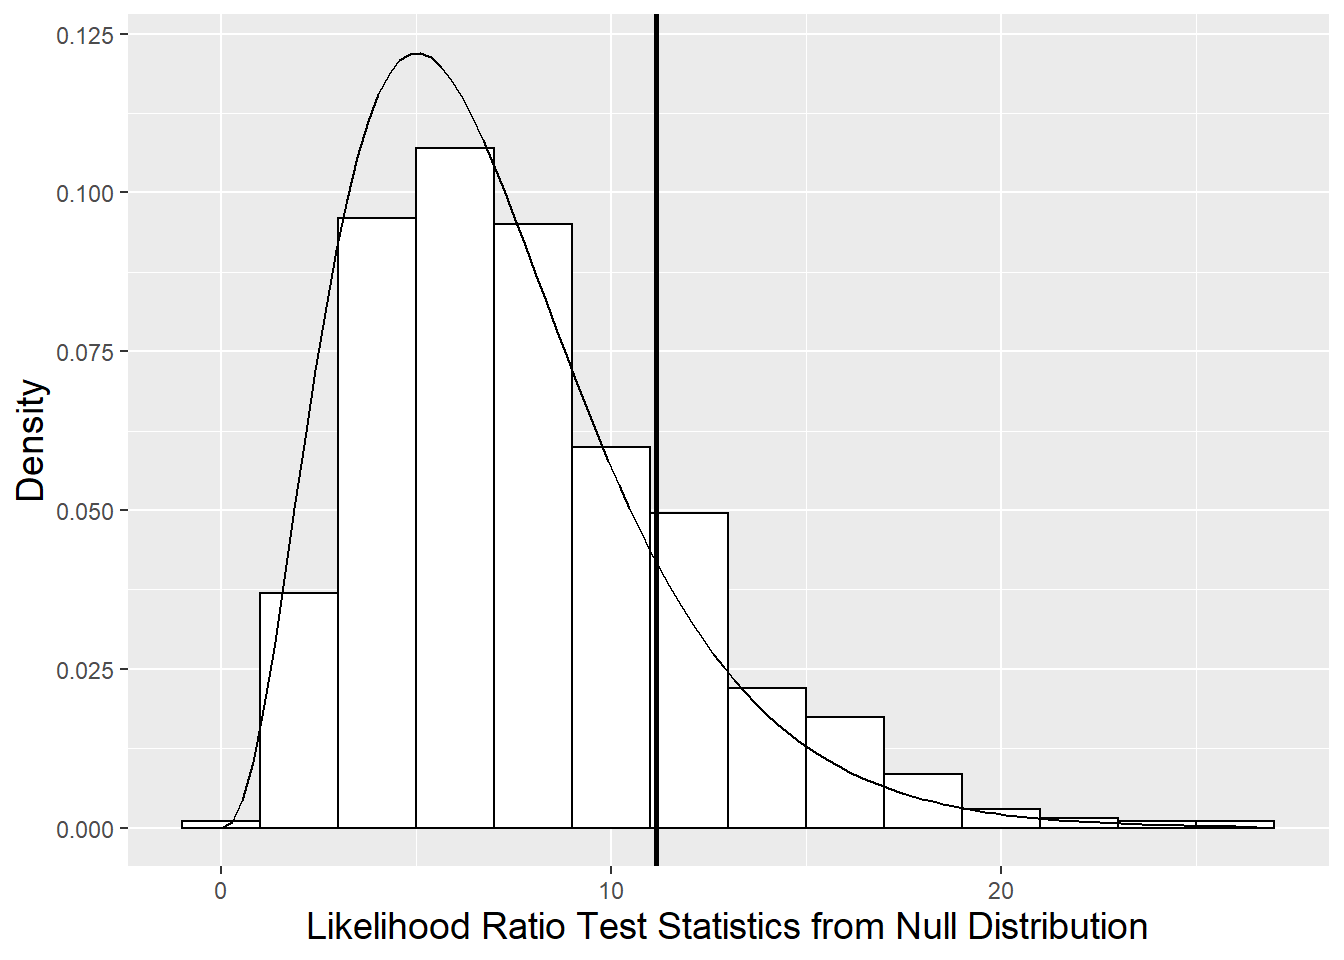 Null distribution of likelihood ratio test statistic derived using parametric bootstrap (histogram) compared to a chi-square distribution with 7 degrees of freedom (smooth curve).  The vertical line represents the observed likelihood ratio test statistic.